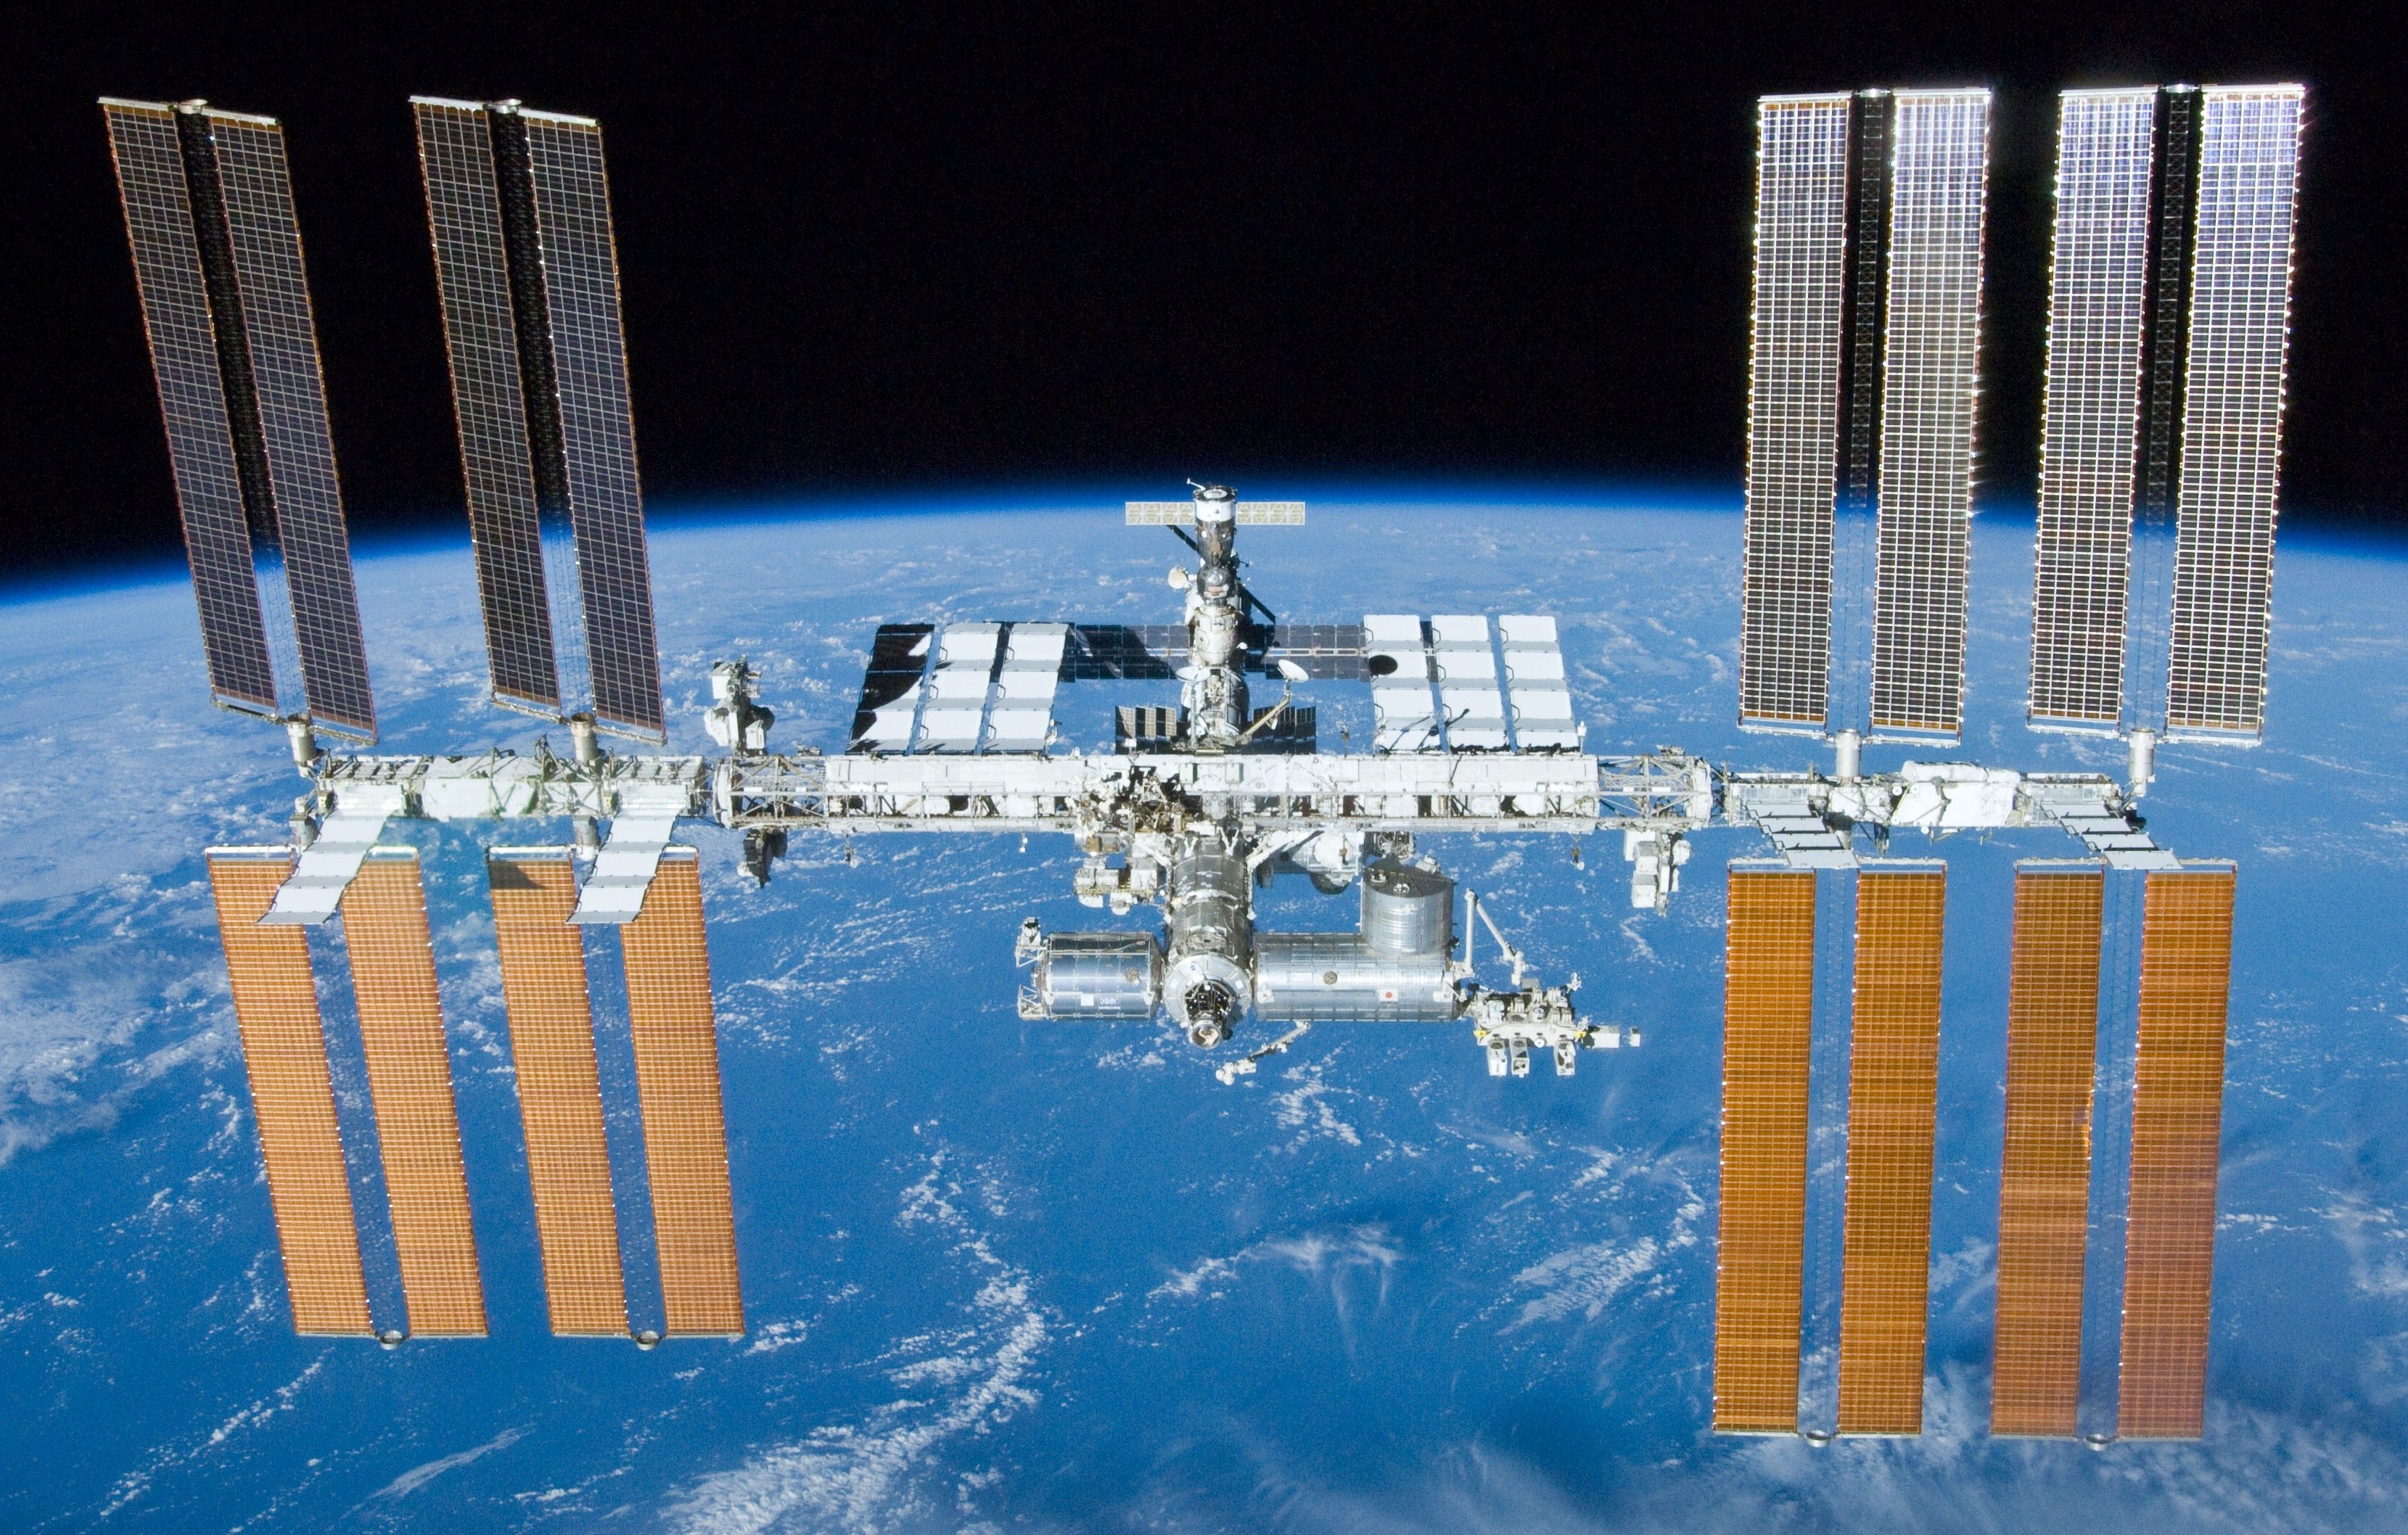 Plankton on the iss, nasa, space